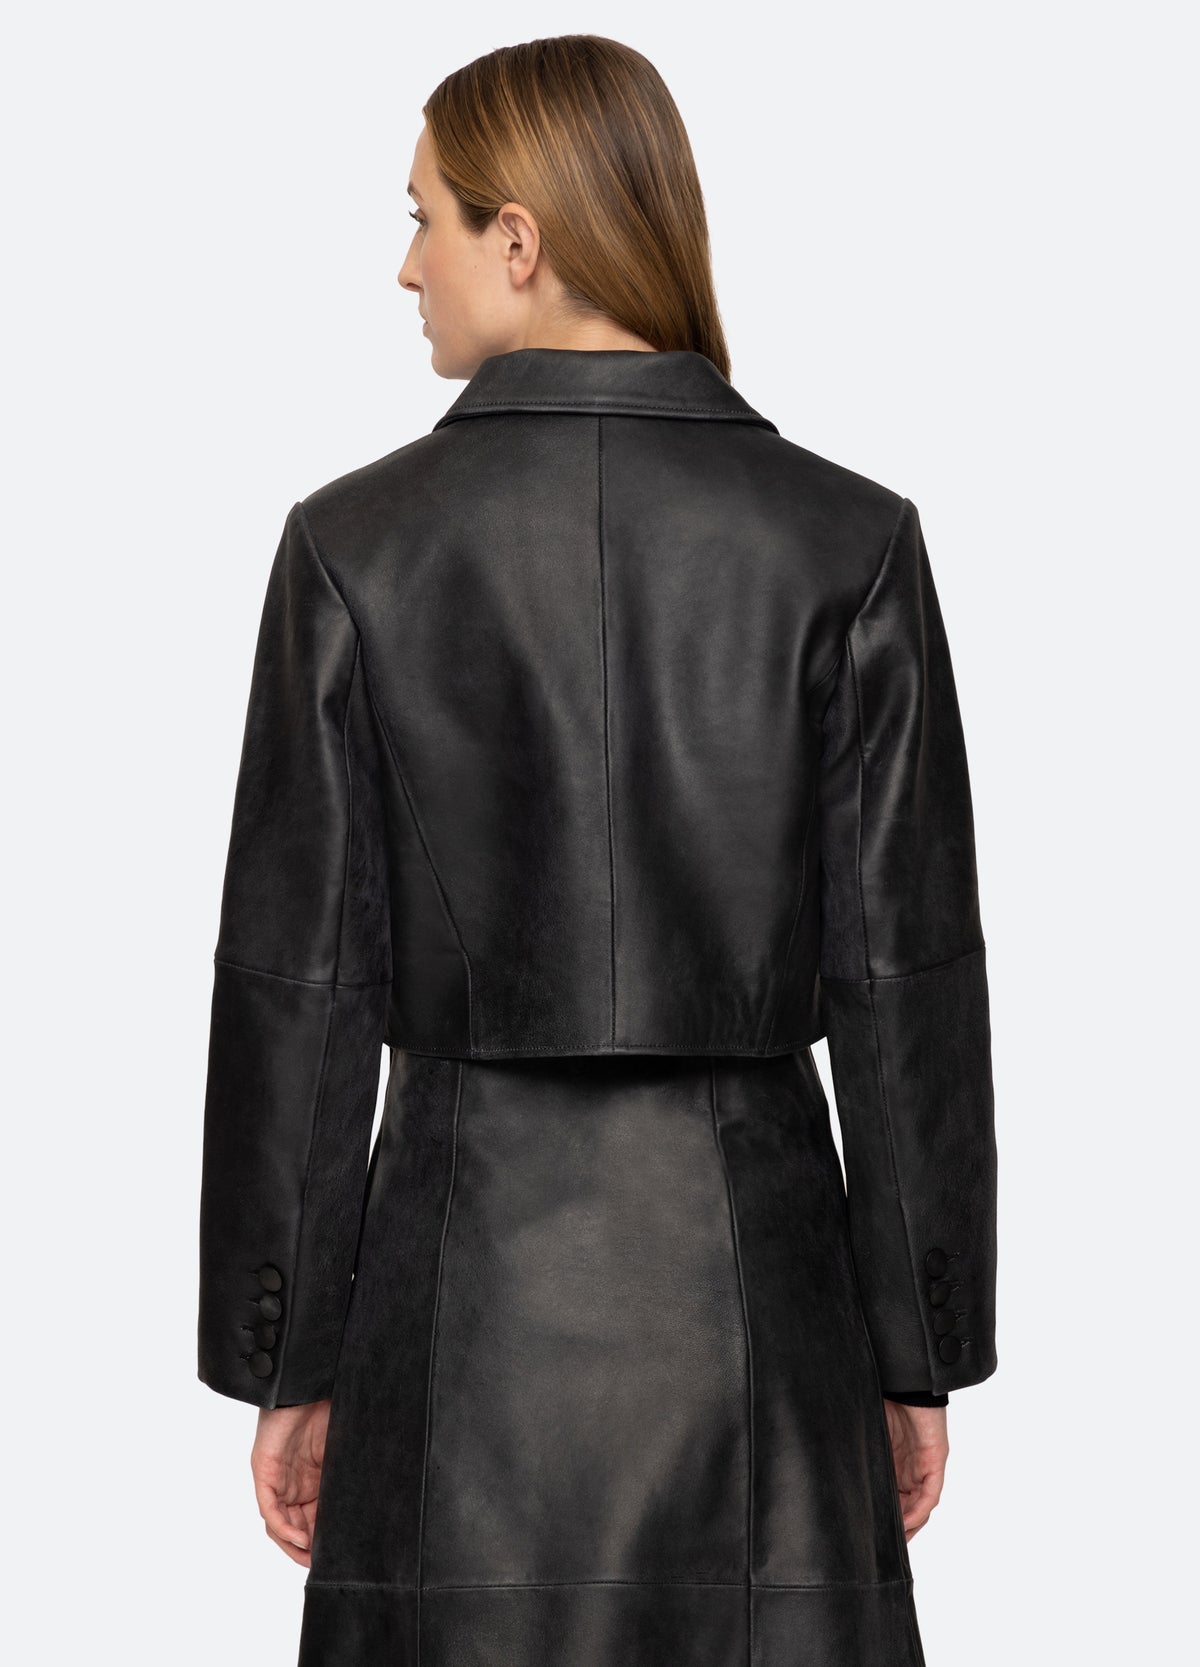 black-andy jacket-back view - 3